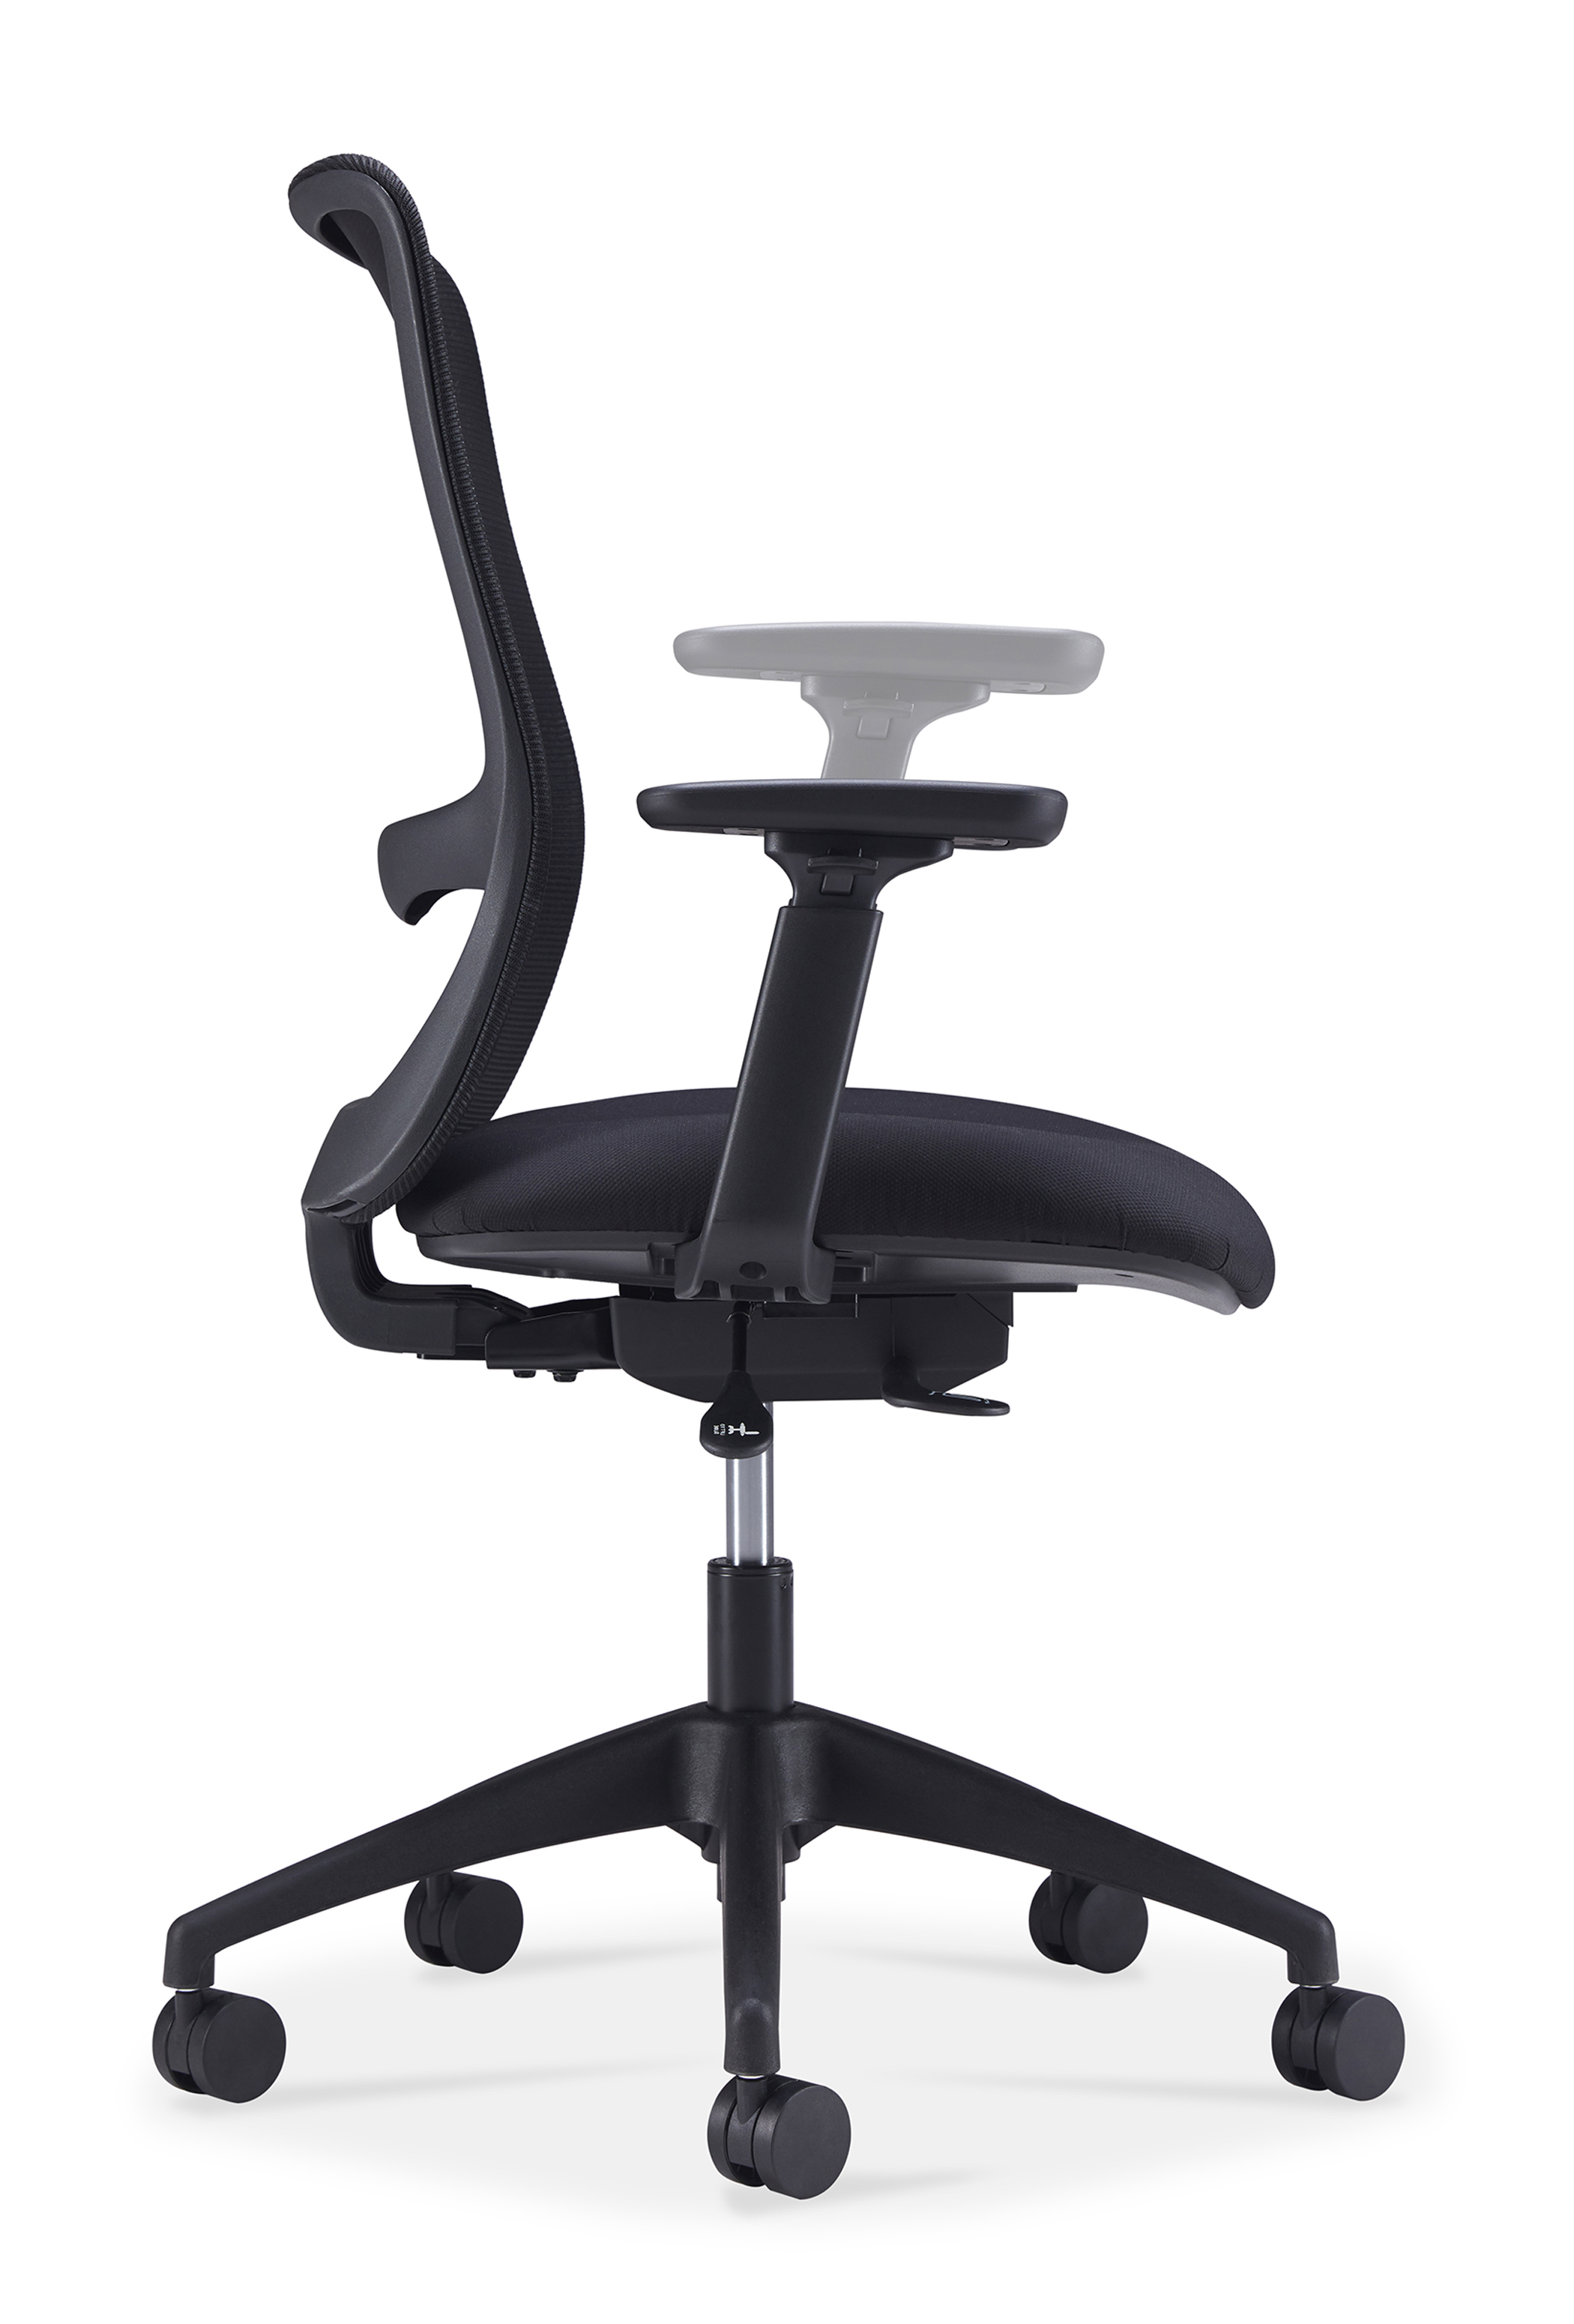 WS - L21 task chair (Side - Arm up)